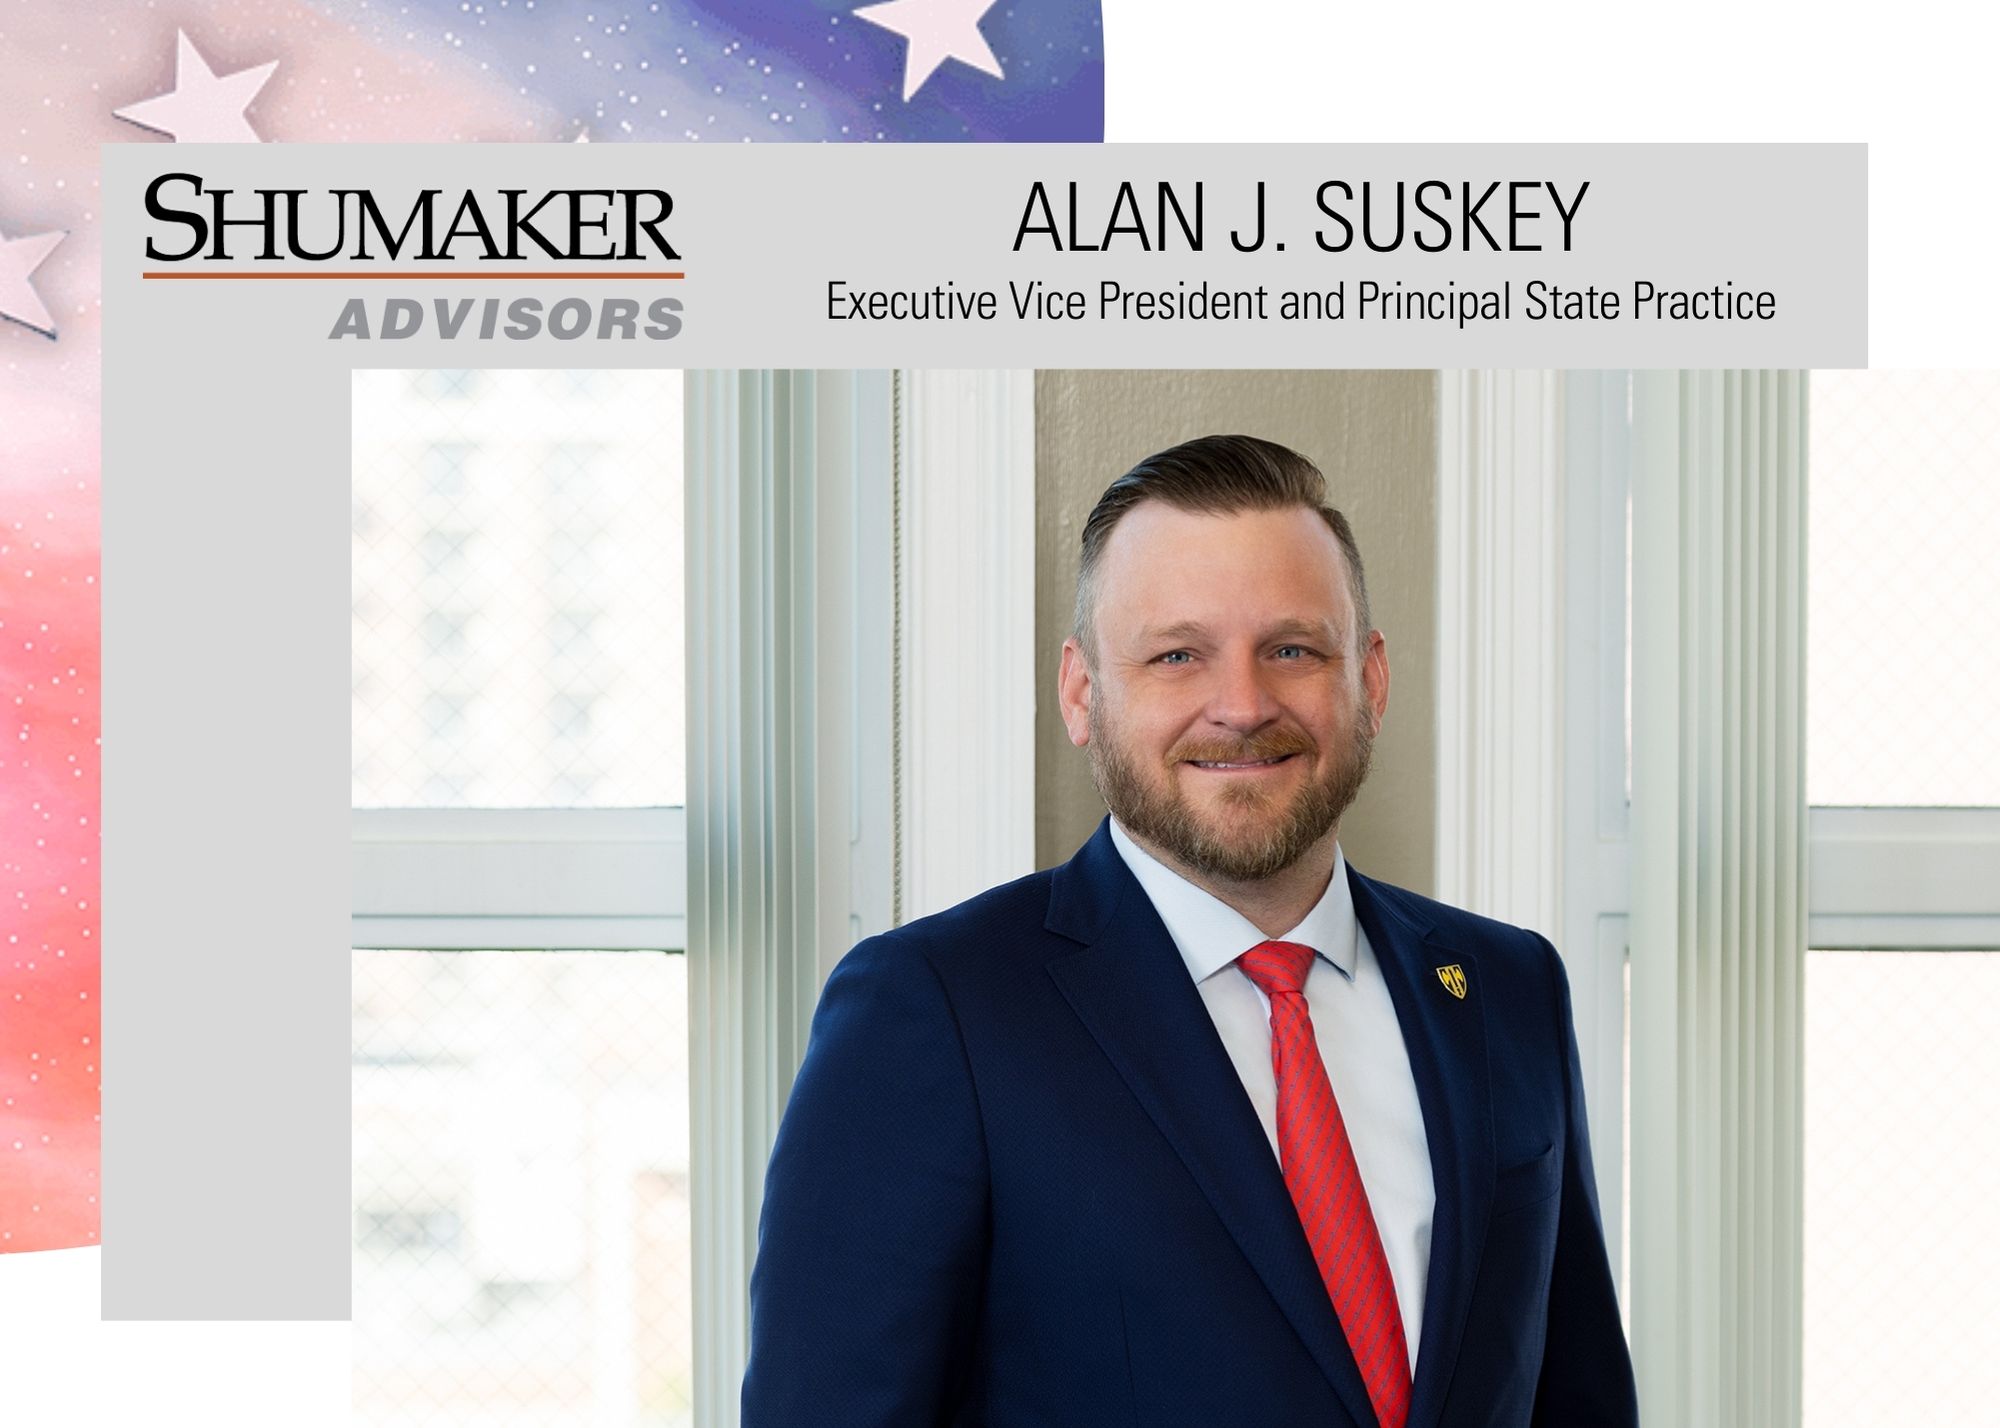 U.S. Rep. Neal Dunn Nominates Alan Suskey for Military Academy Selection Committee 